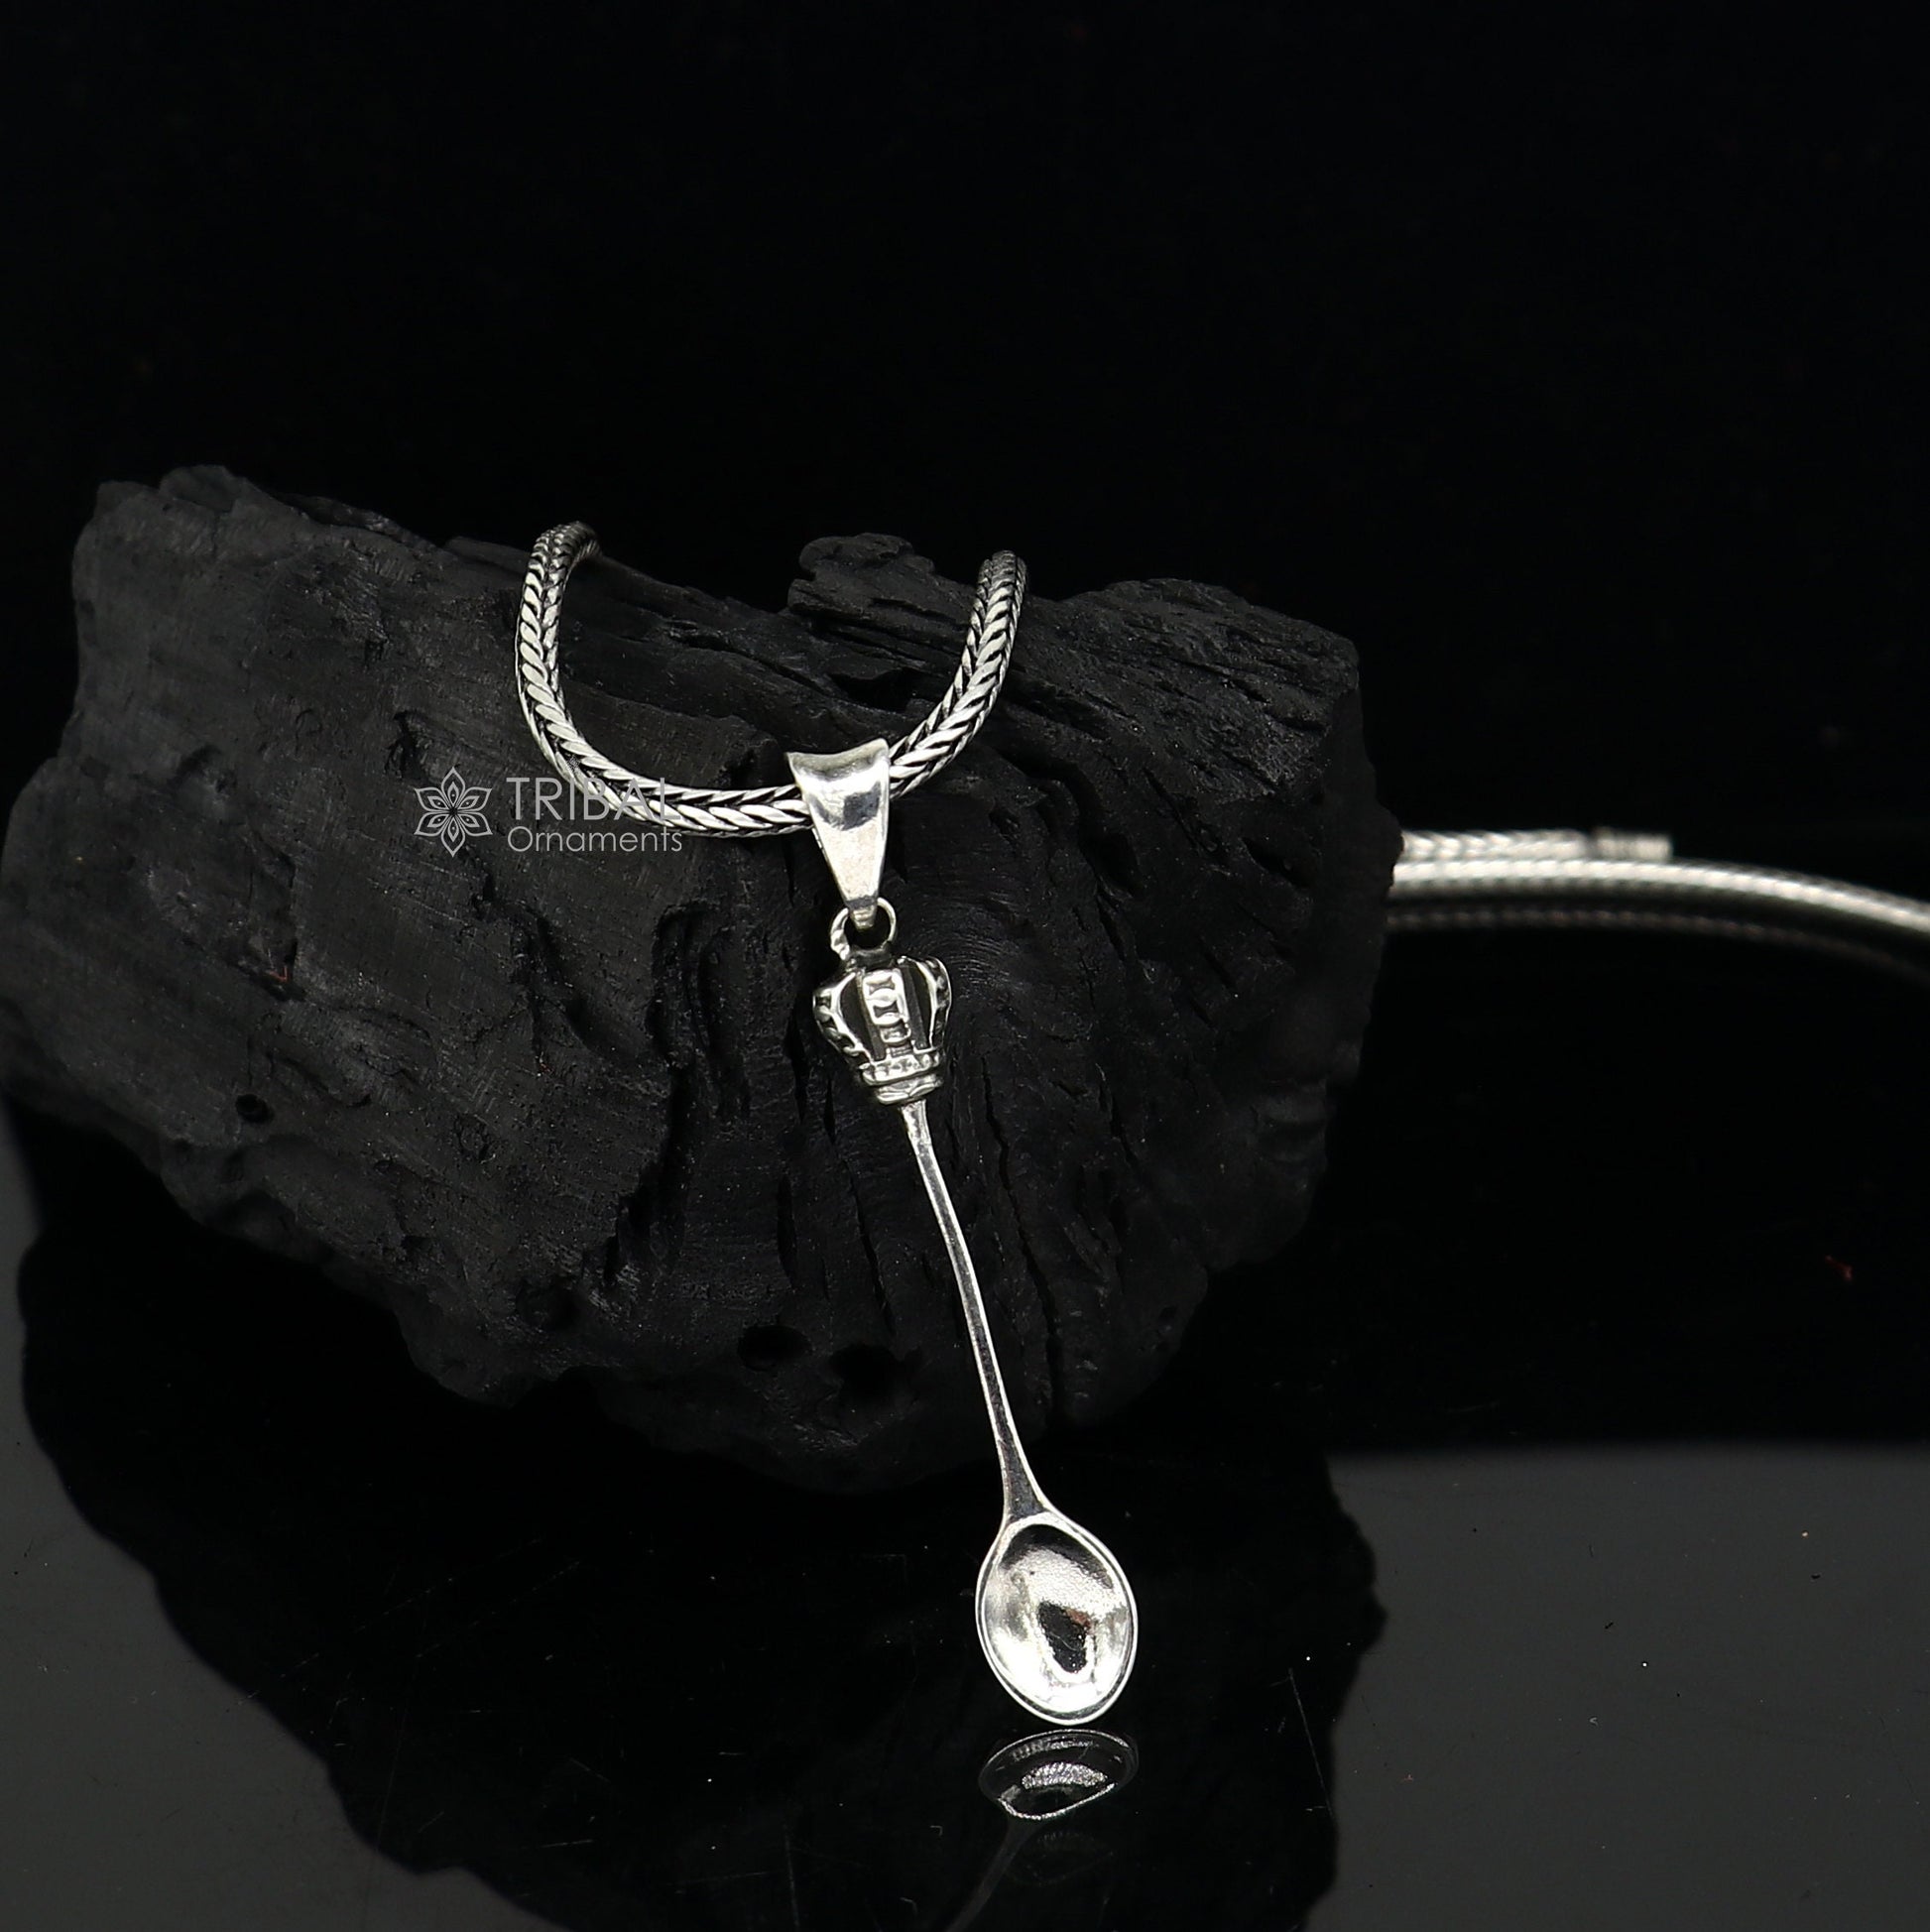 925 Sterling silver unique spoon design Men Vantage Crafts Pendant best gifting jewelry NSP752 - TRIBAL ORNAMENTS